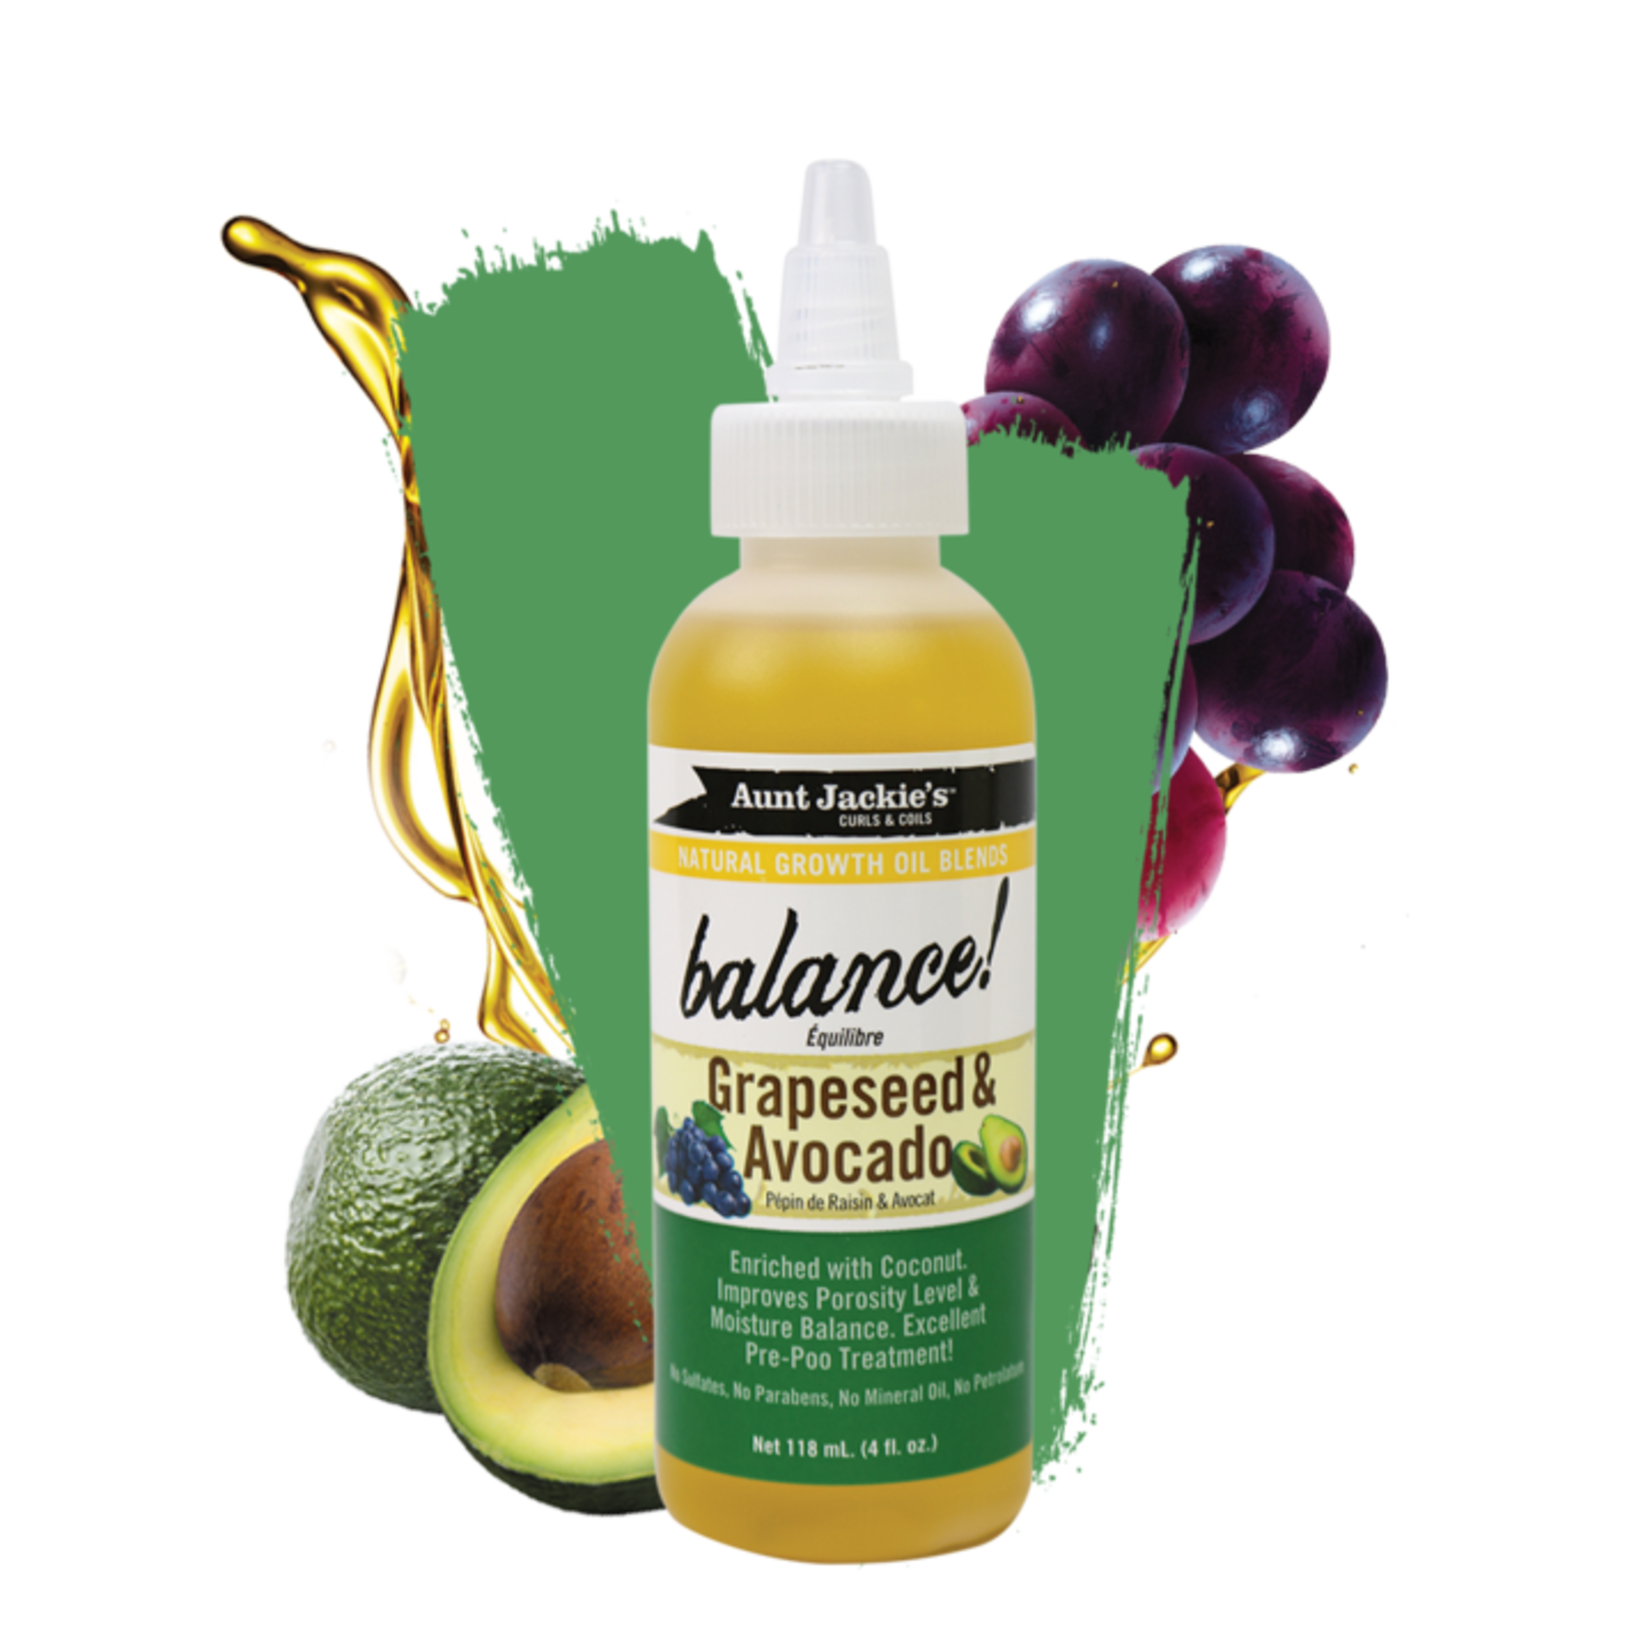 Aunt Jackie's Balance! Natural Growth Oil